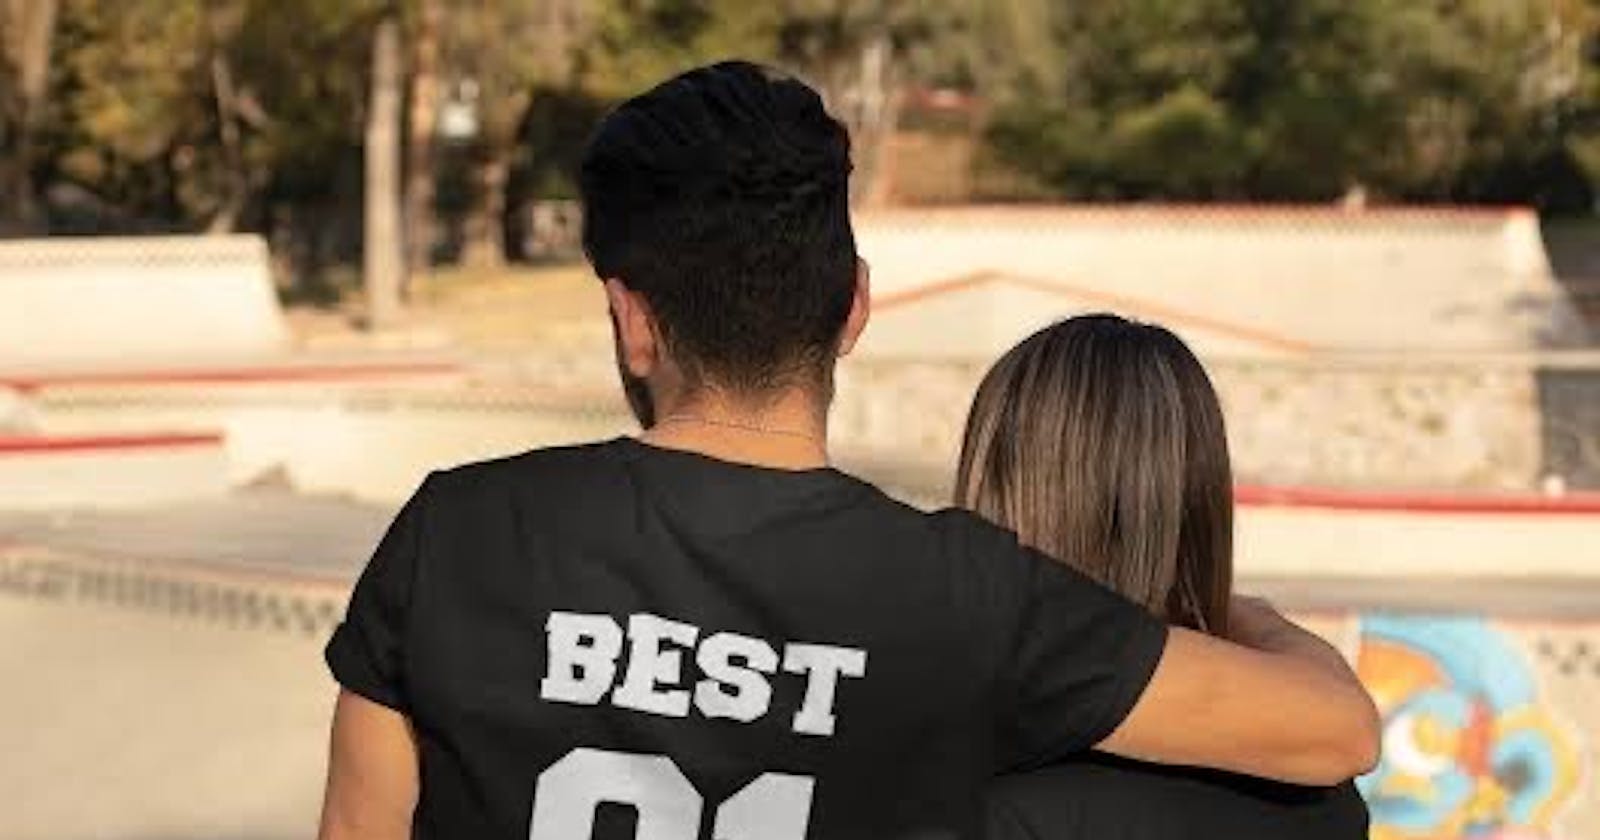 15 Reasons Why You Should Not Marry Your Best Friend